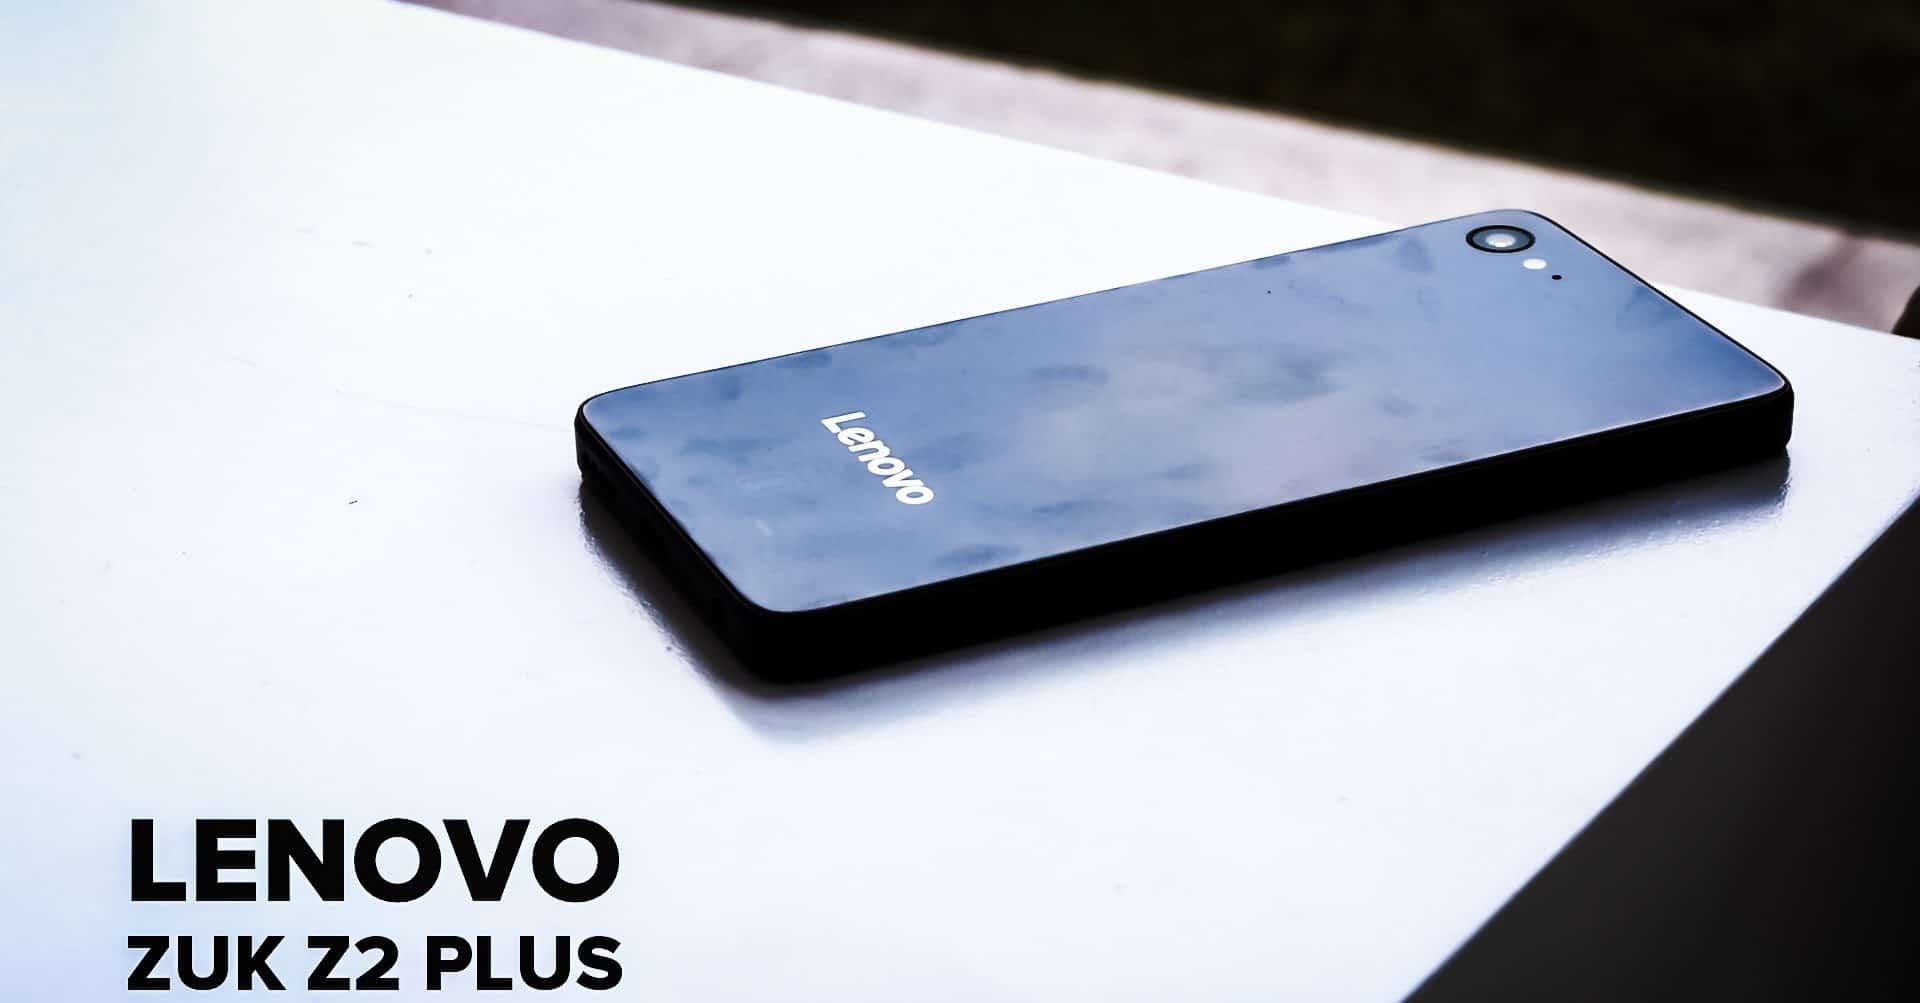 How to Install TWRP Recovery and Root Lenovo ZUK Z2 and Z2 Plus